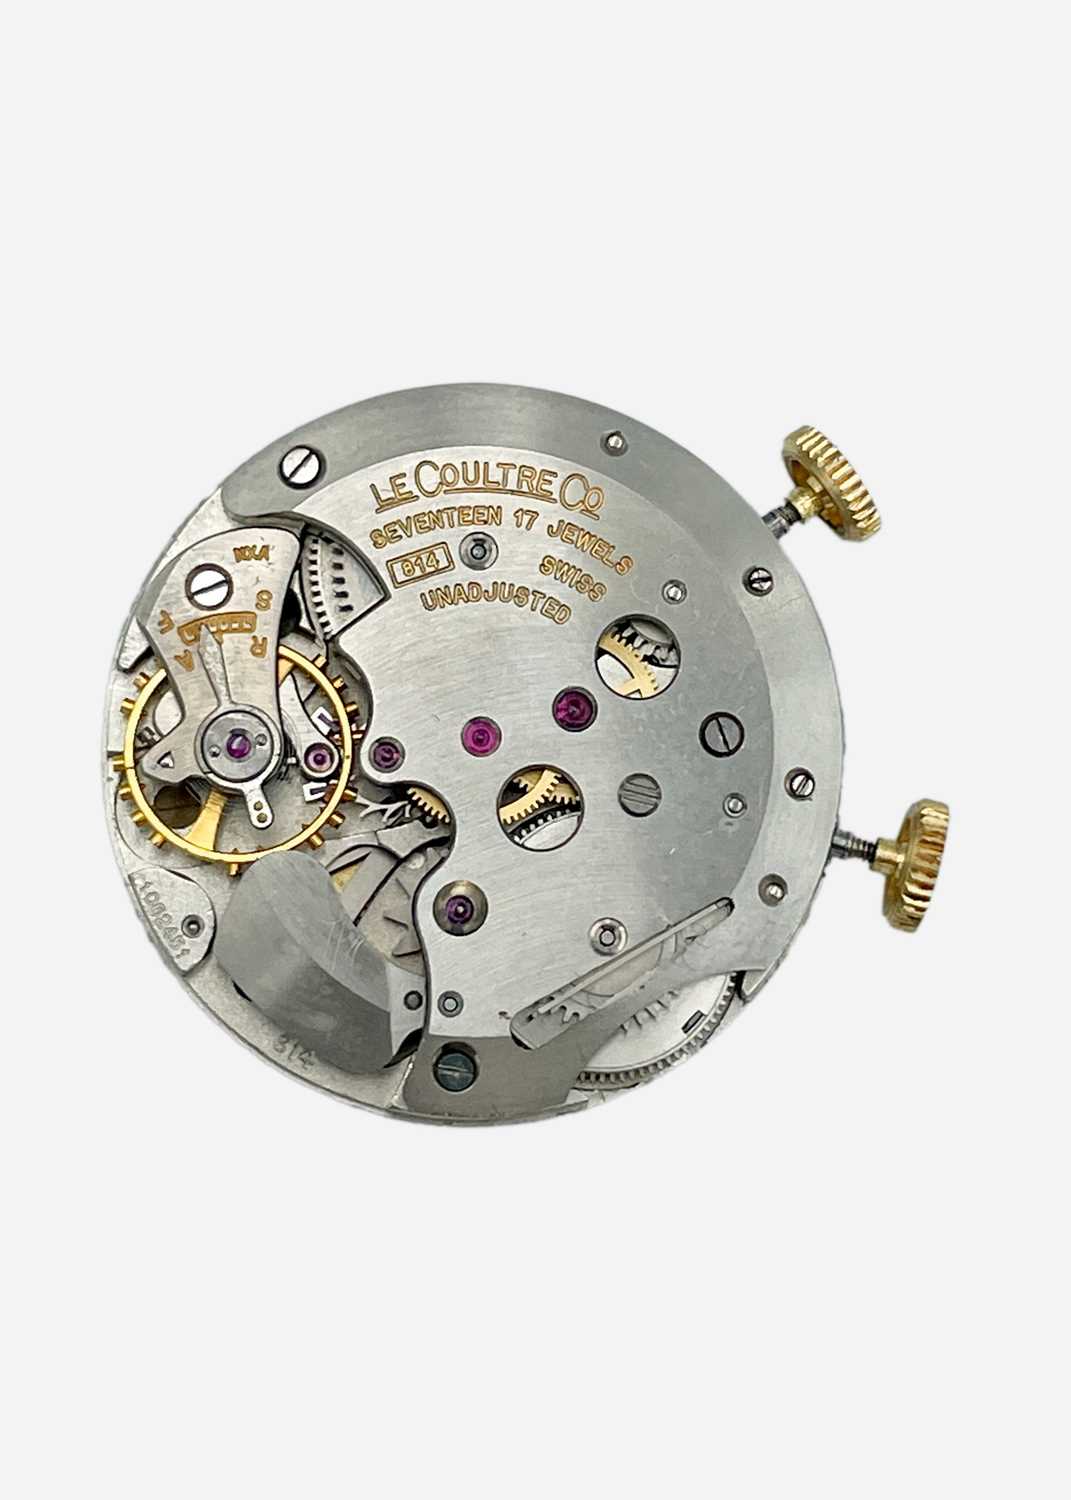 LECOULTRE - A rare LeCoultre Memovox Alarm 10k gold-filled gentleman's wristwatch. - Image 3 of 4